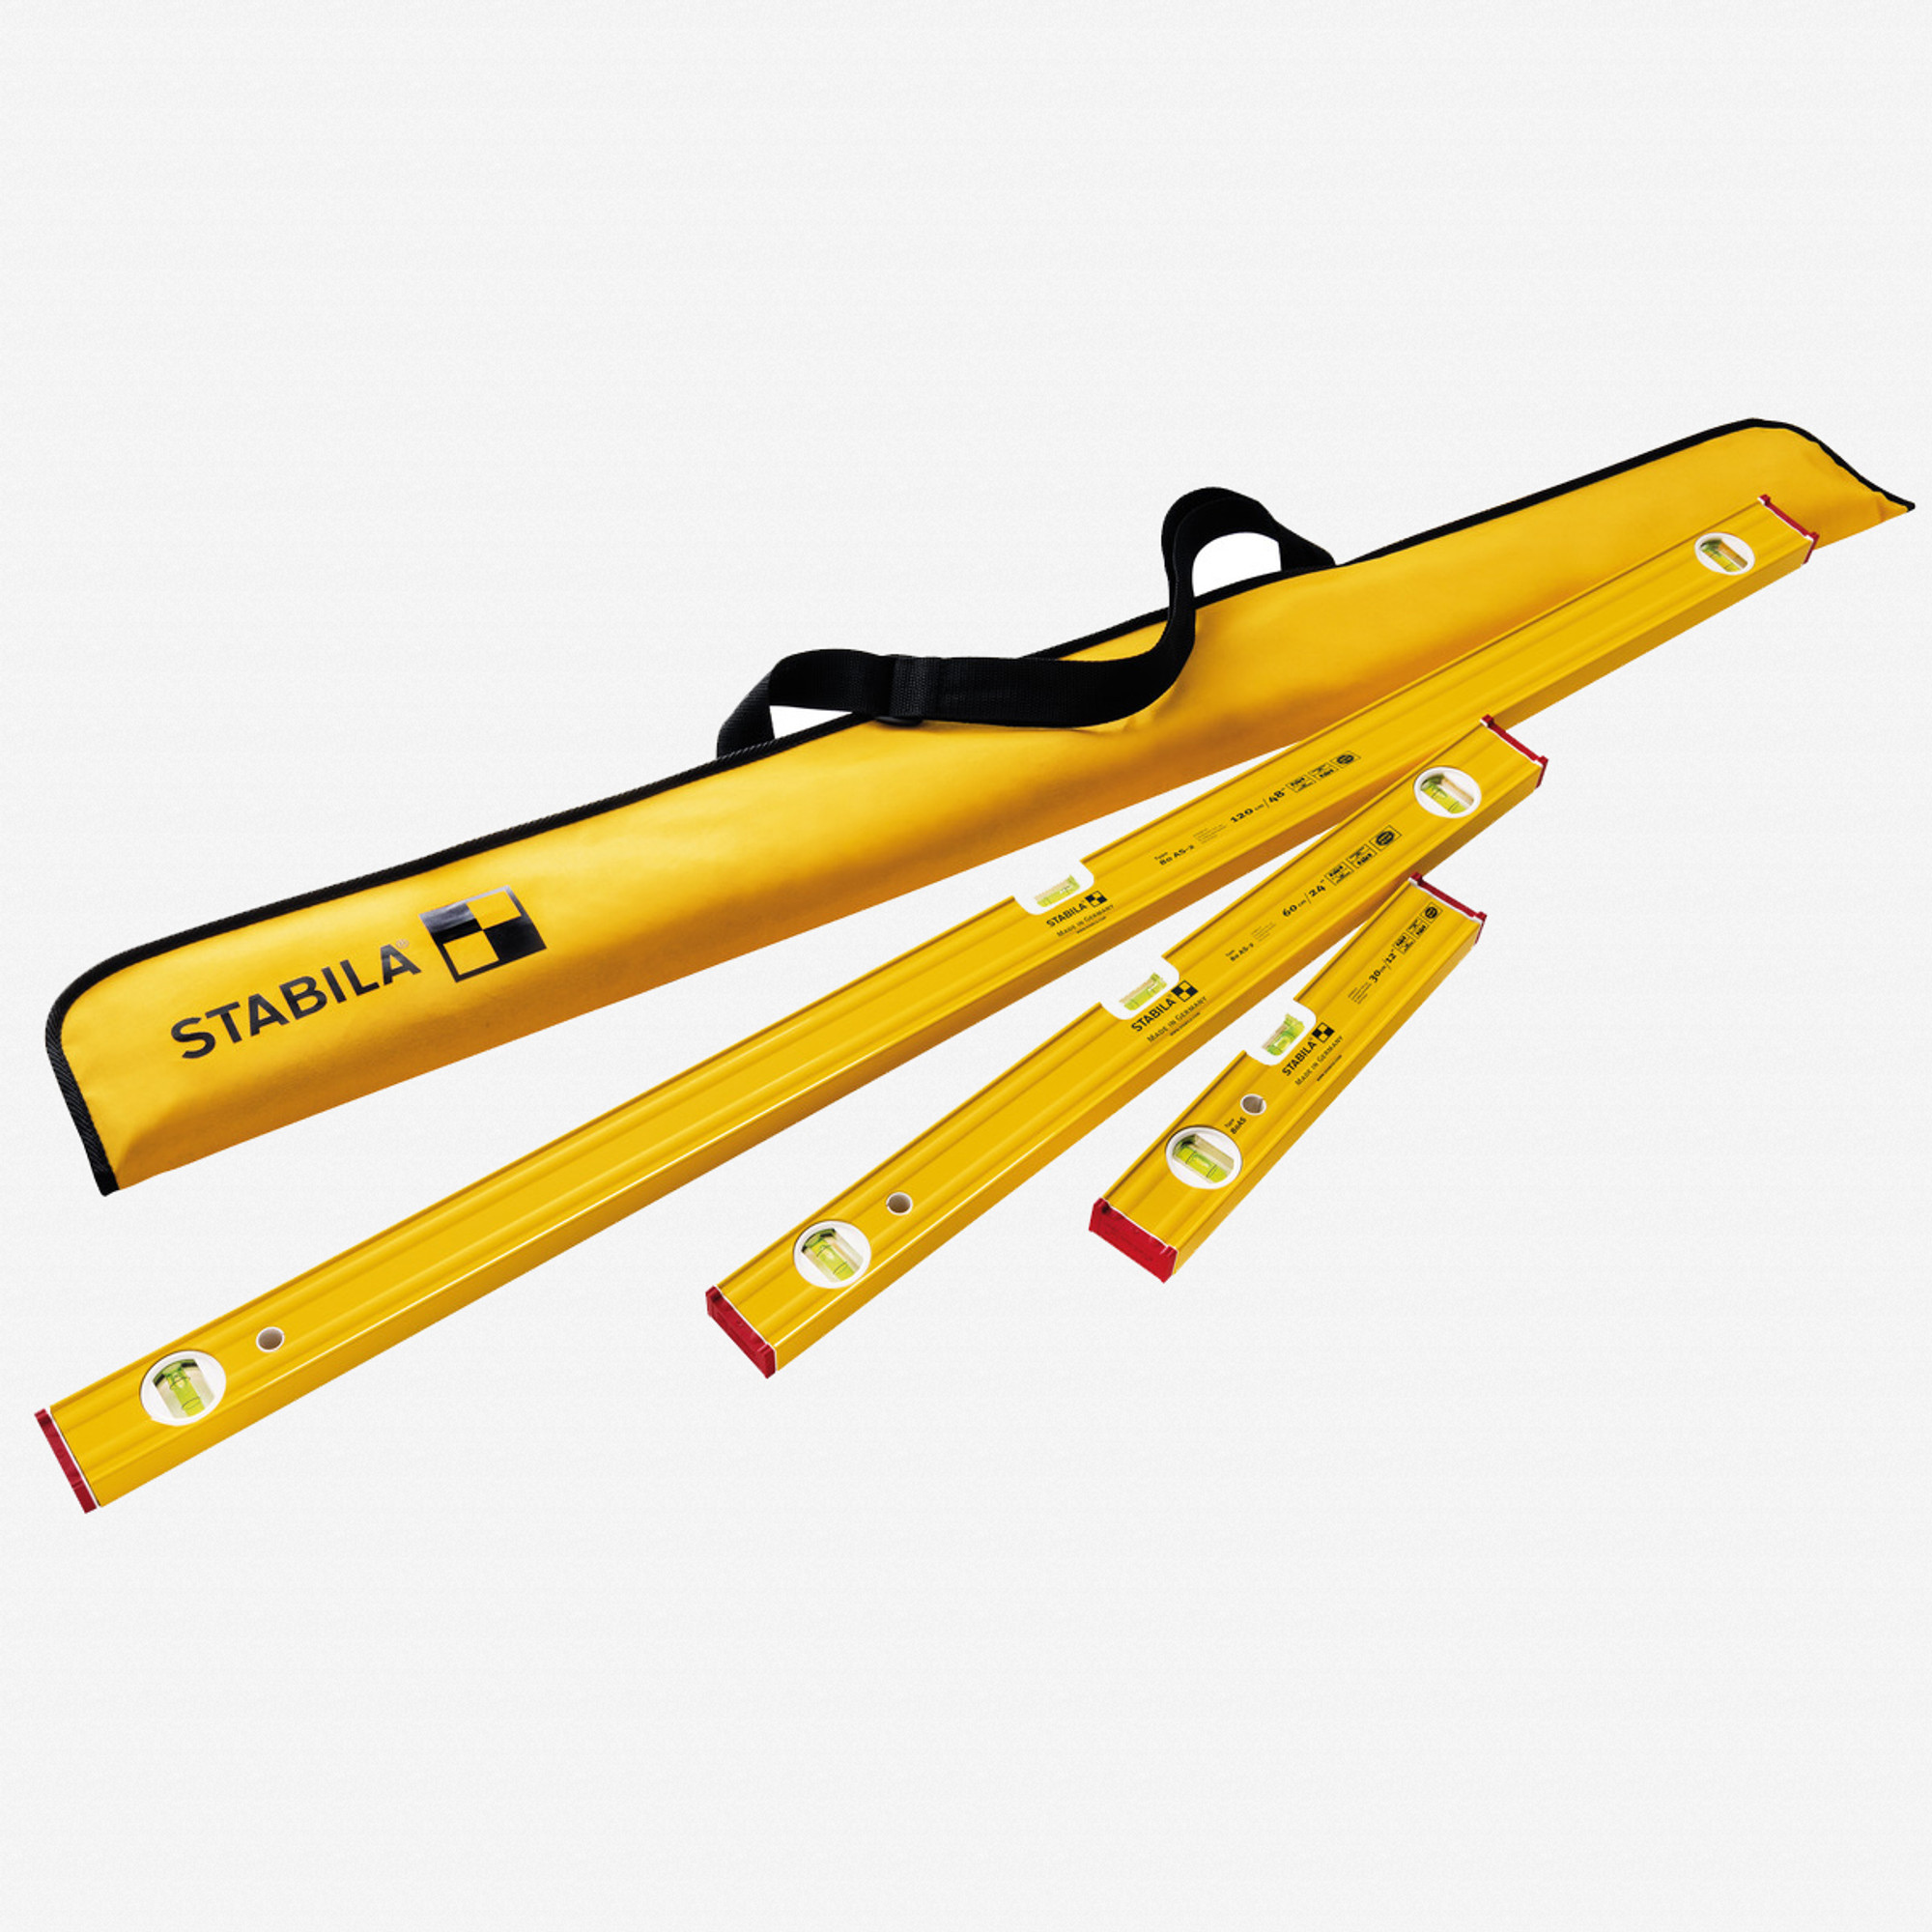 Stabila 29840 Pro 3 Level Set - 12" 80AS, 24" 80AS, 48" 80AS with Carrying Case - KC Tool